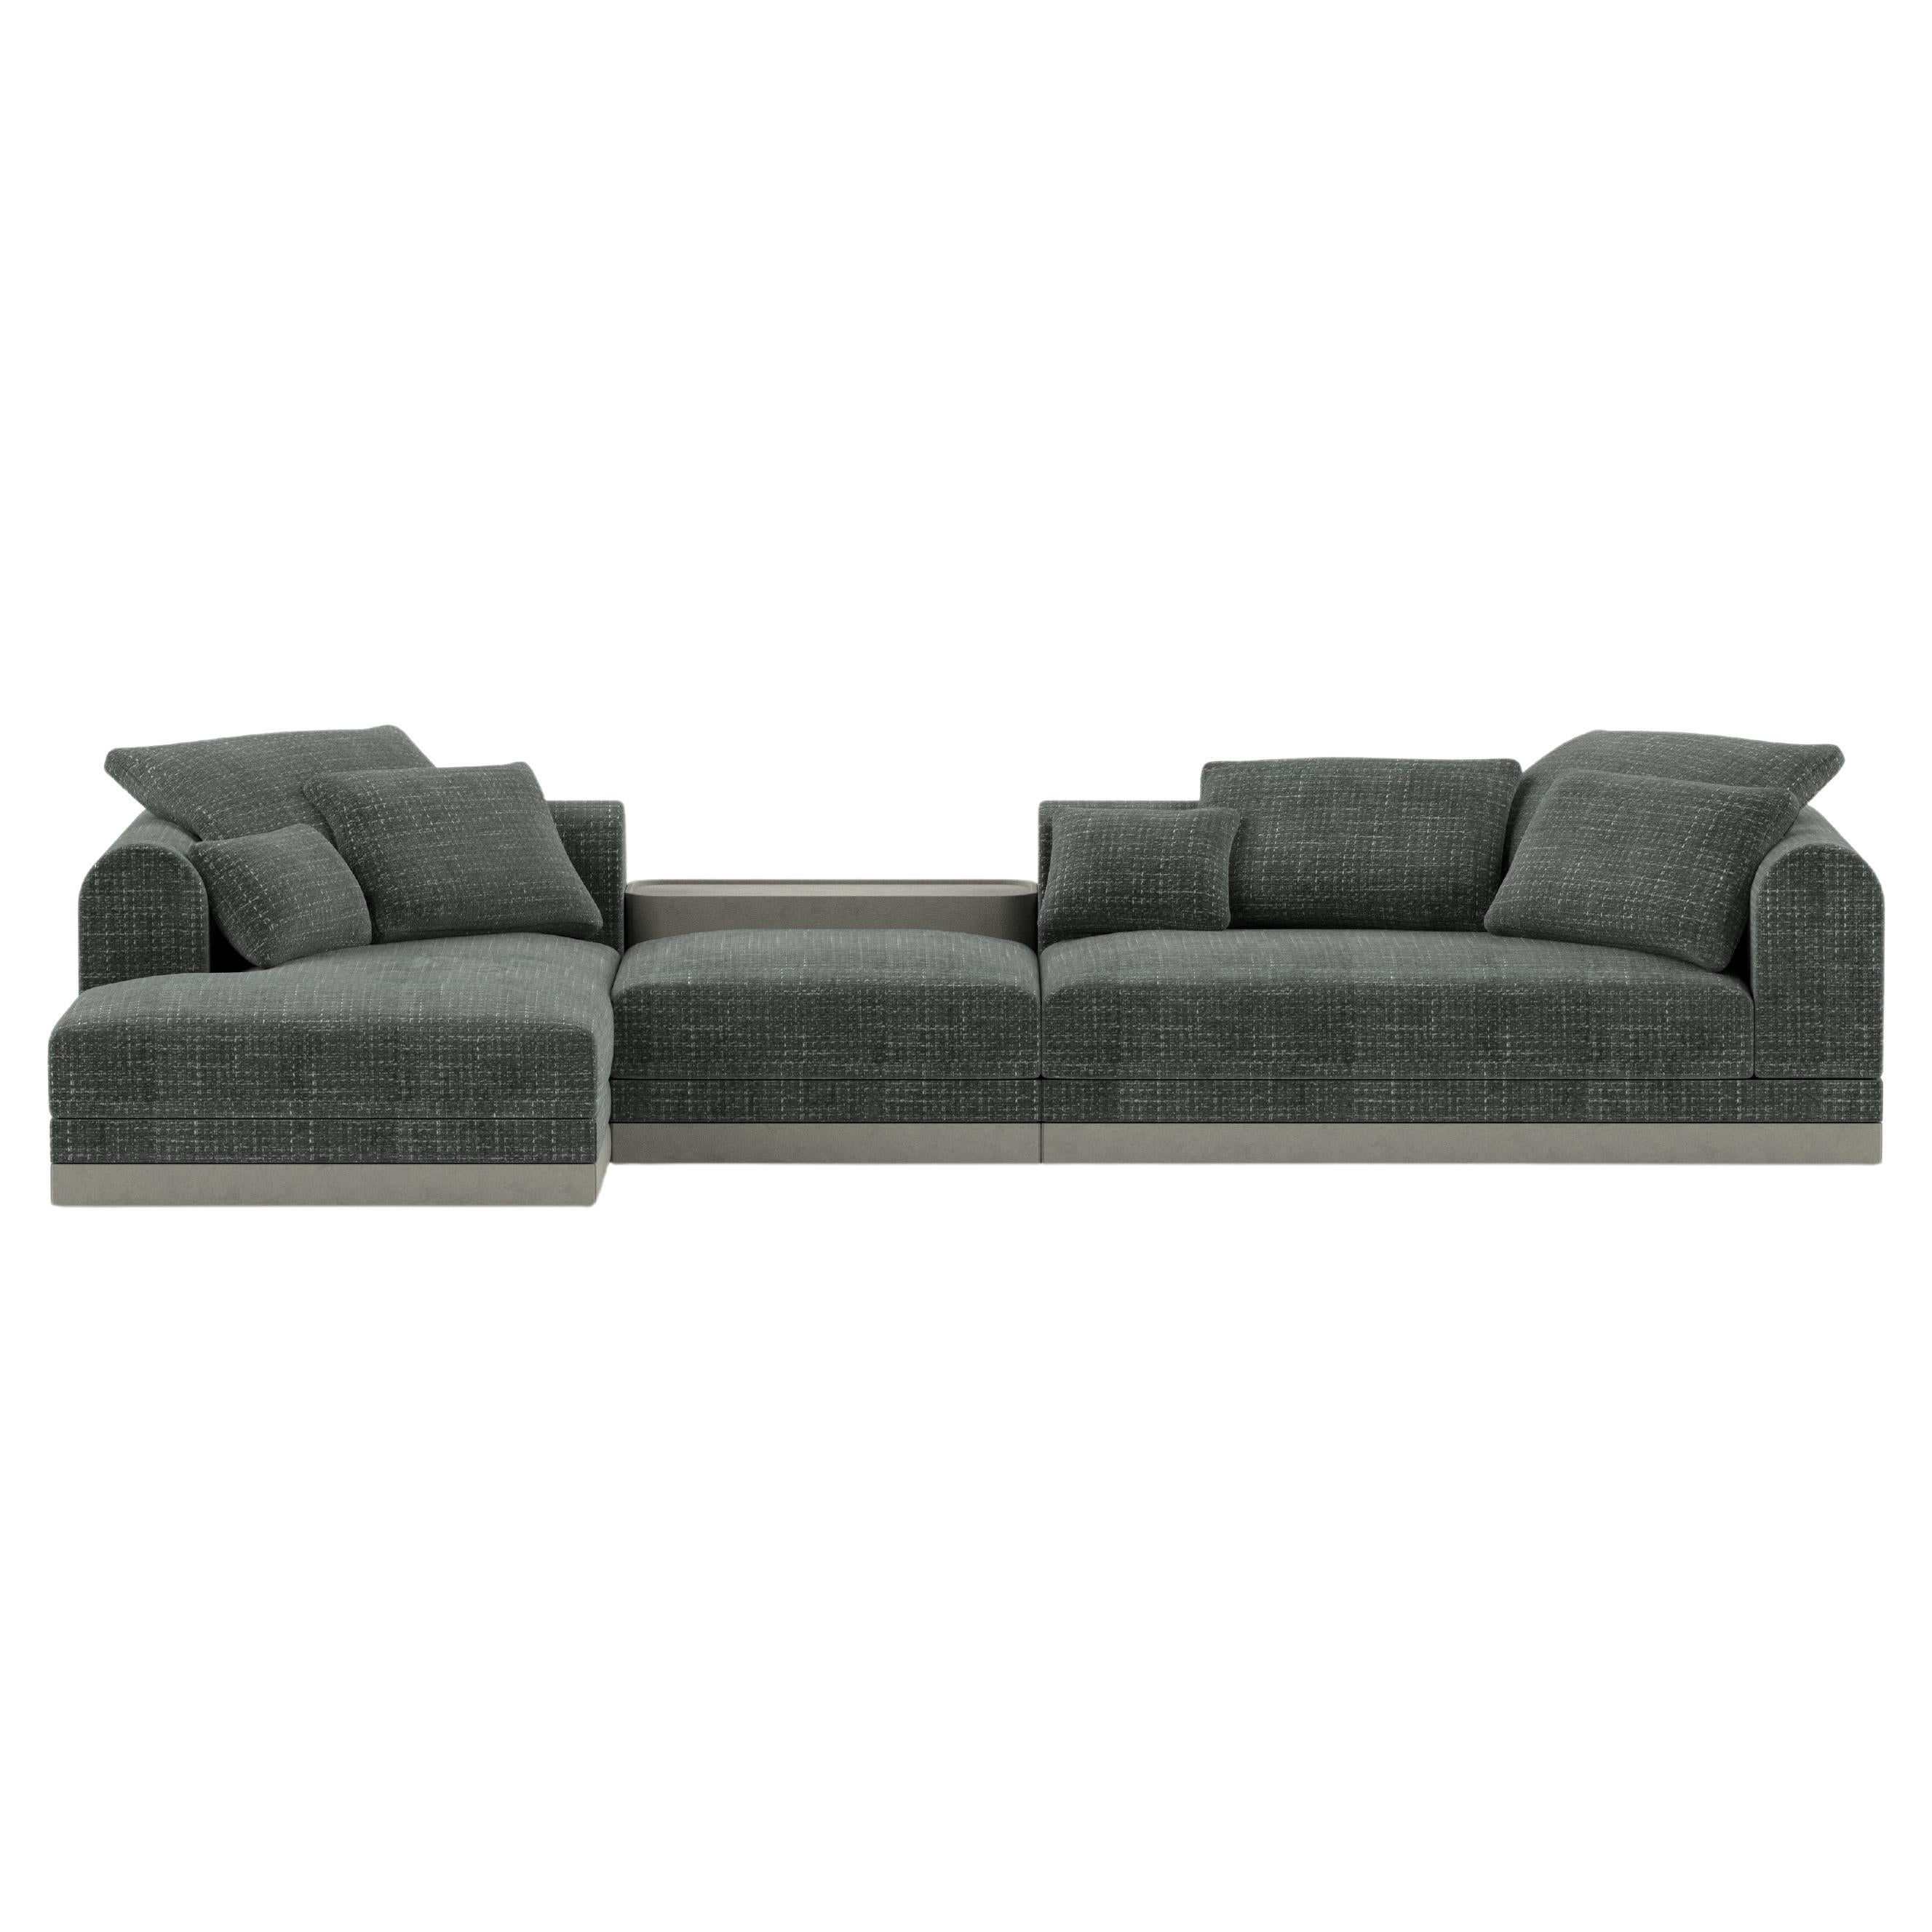 'Aqueduct' Contemporary Sofa by Poiat, Setup 3, Yang 95, Low Plinth For Sale